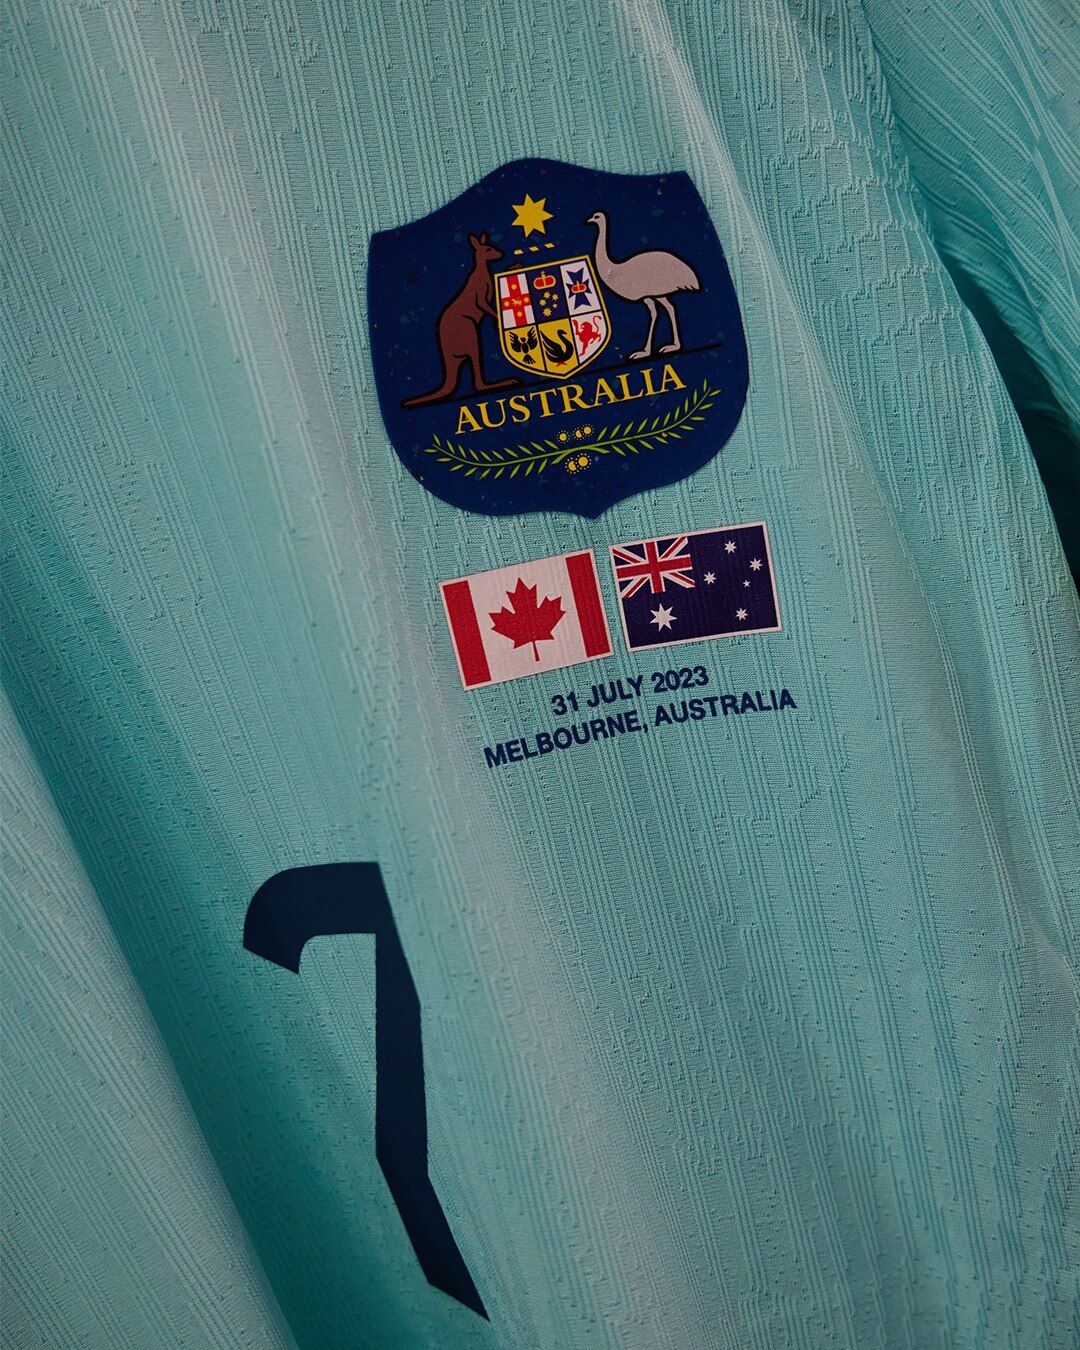 A close up for the turquoise blue Matildas jersey with the Australian and Canadian flag and the July 31 date